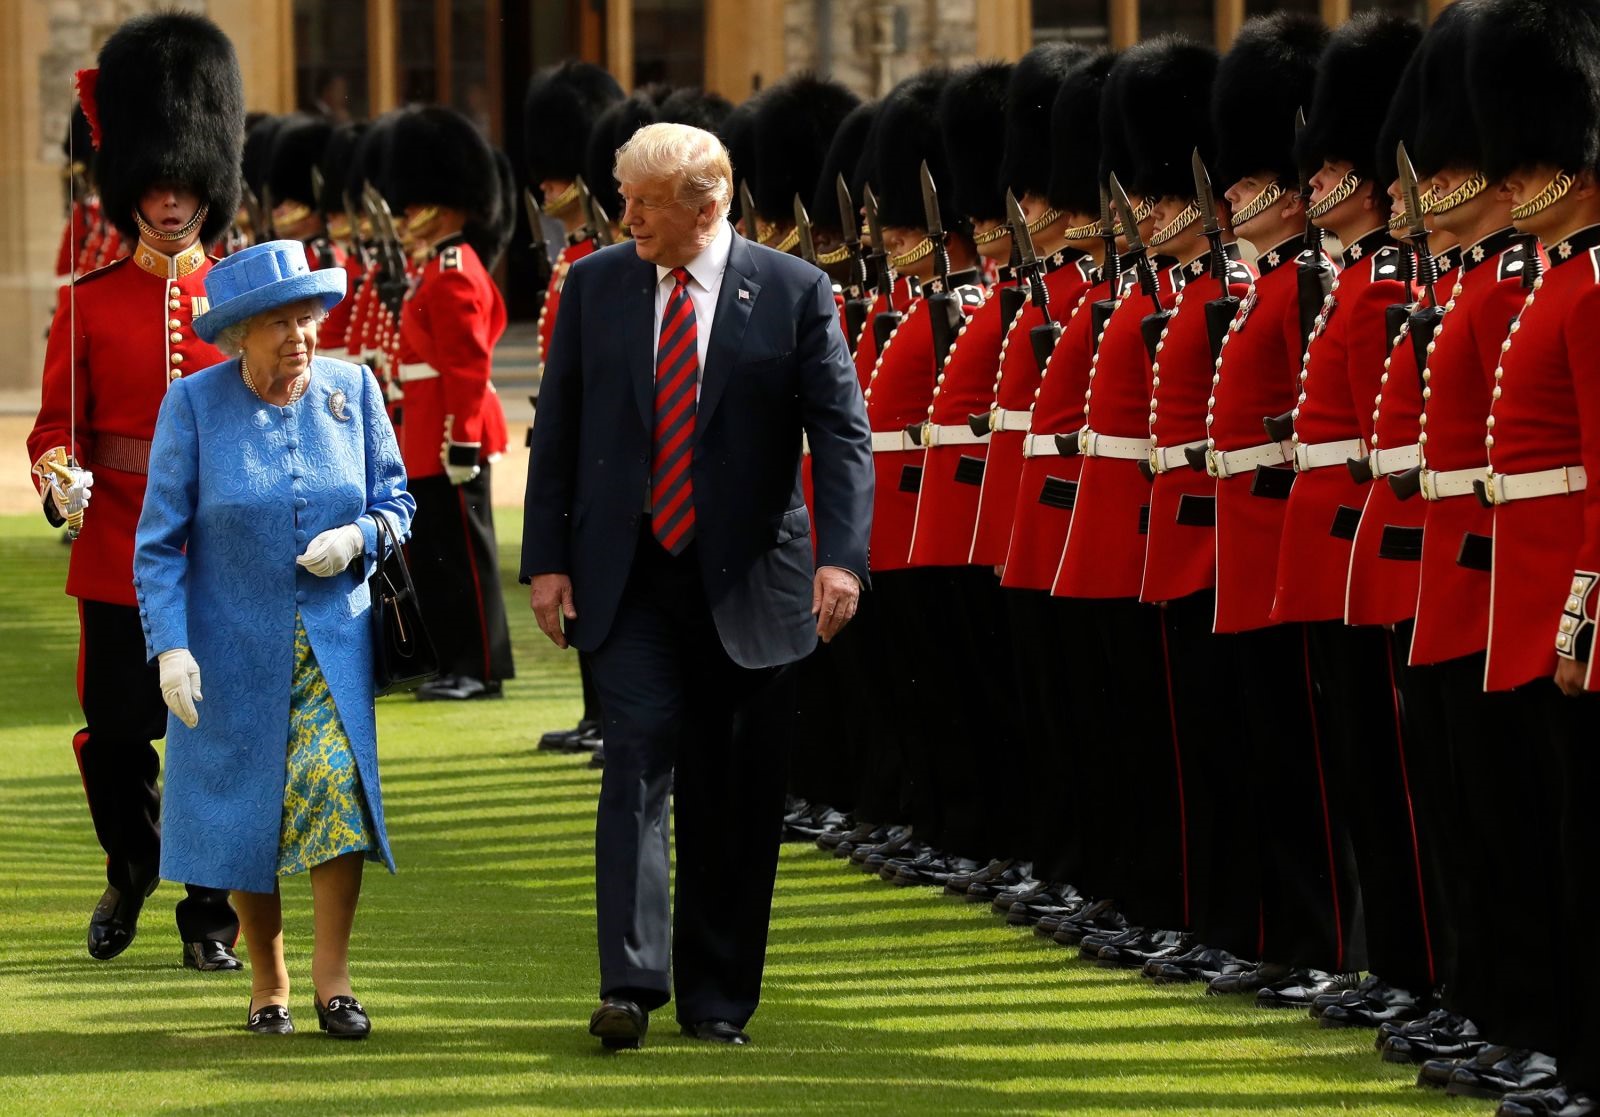 The Queen and US President Donald Trump inspect the guard of honor during Mr. Trump's visit to Windsor Castle in July 2018. Photo: Getty